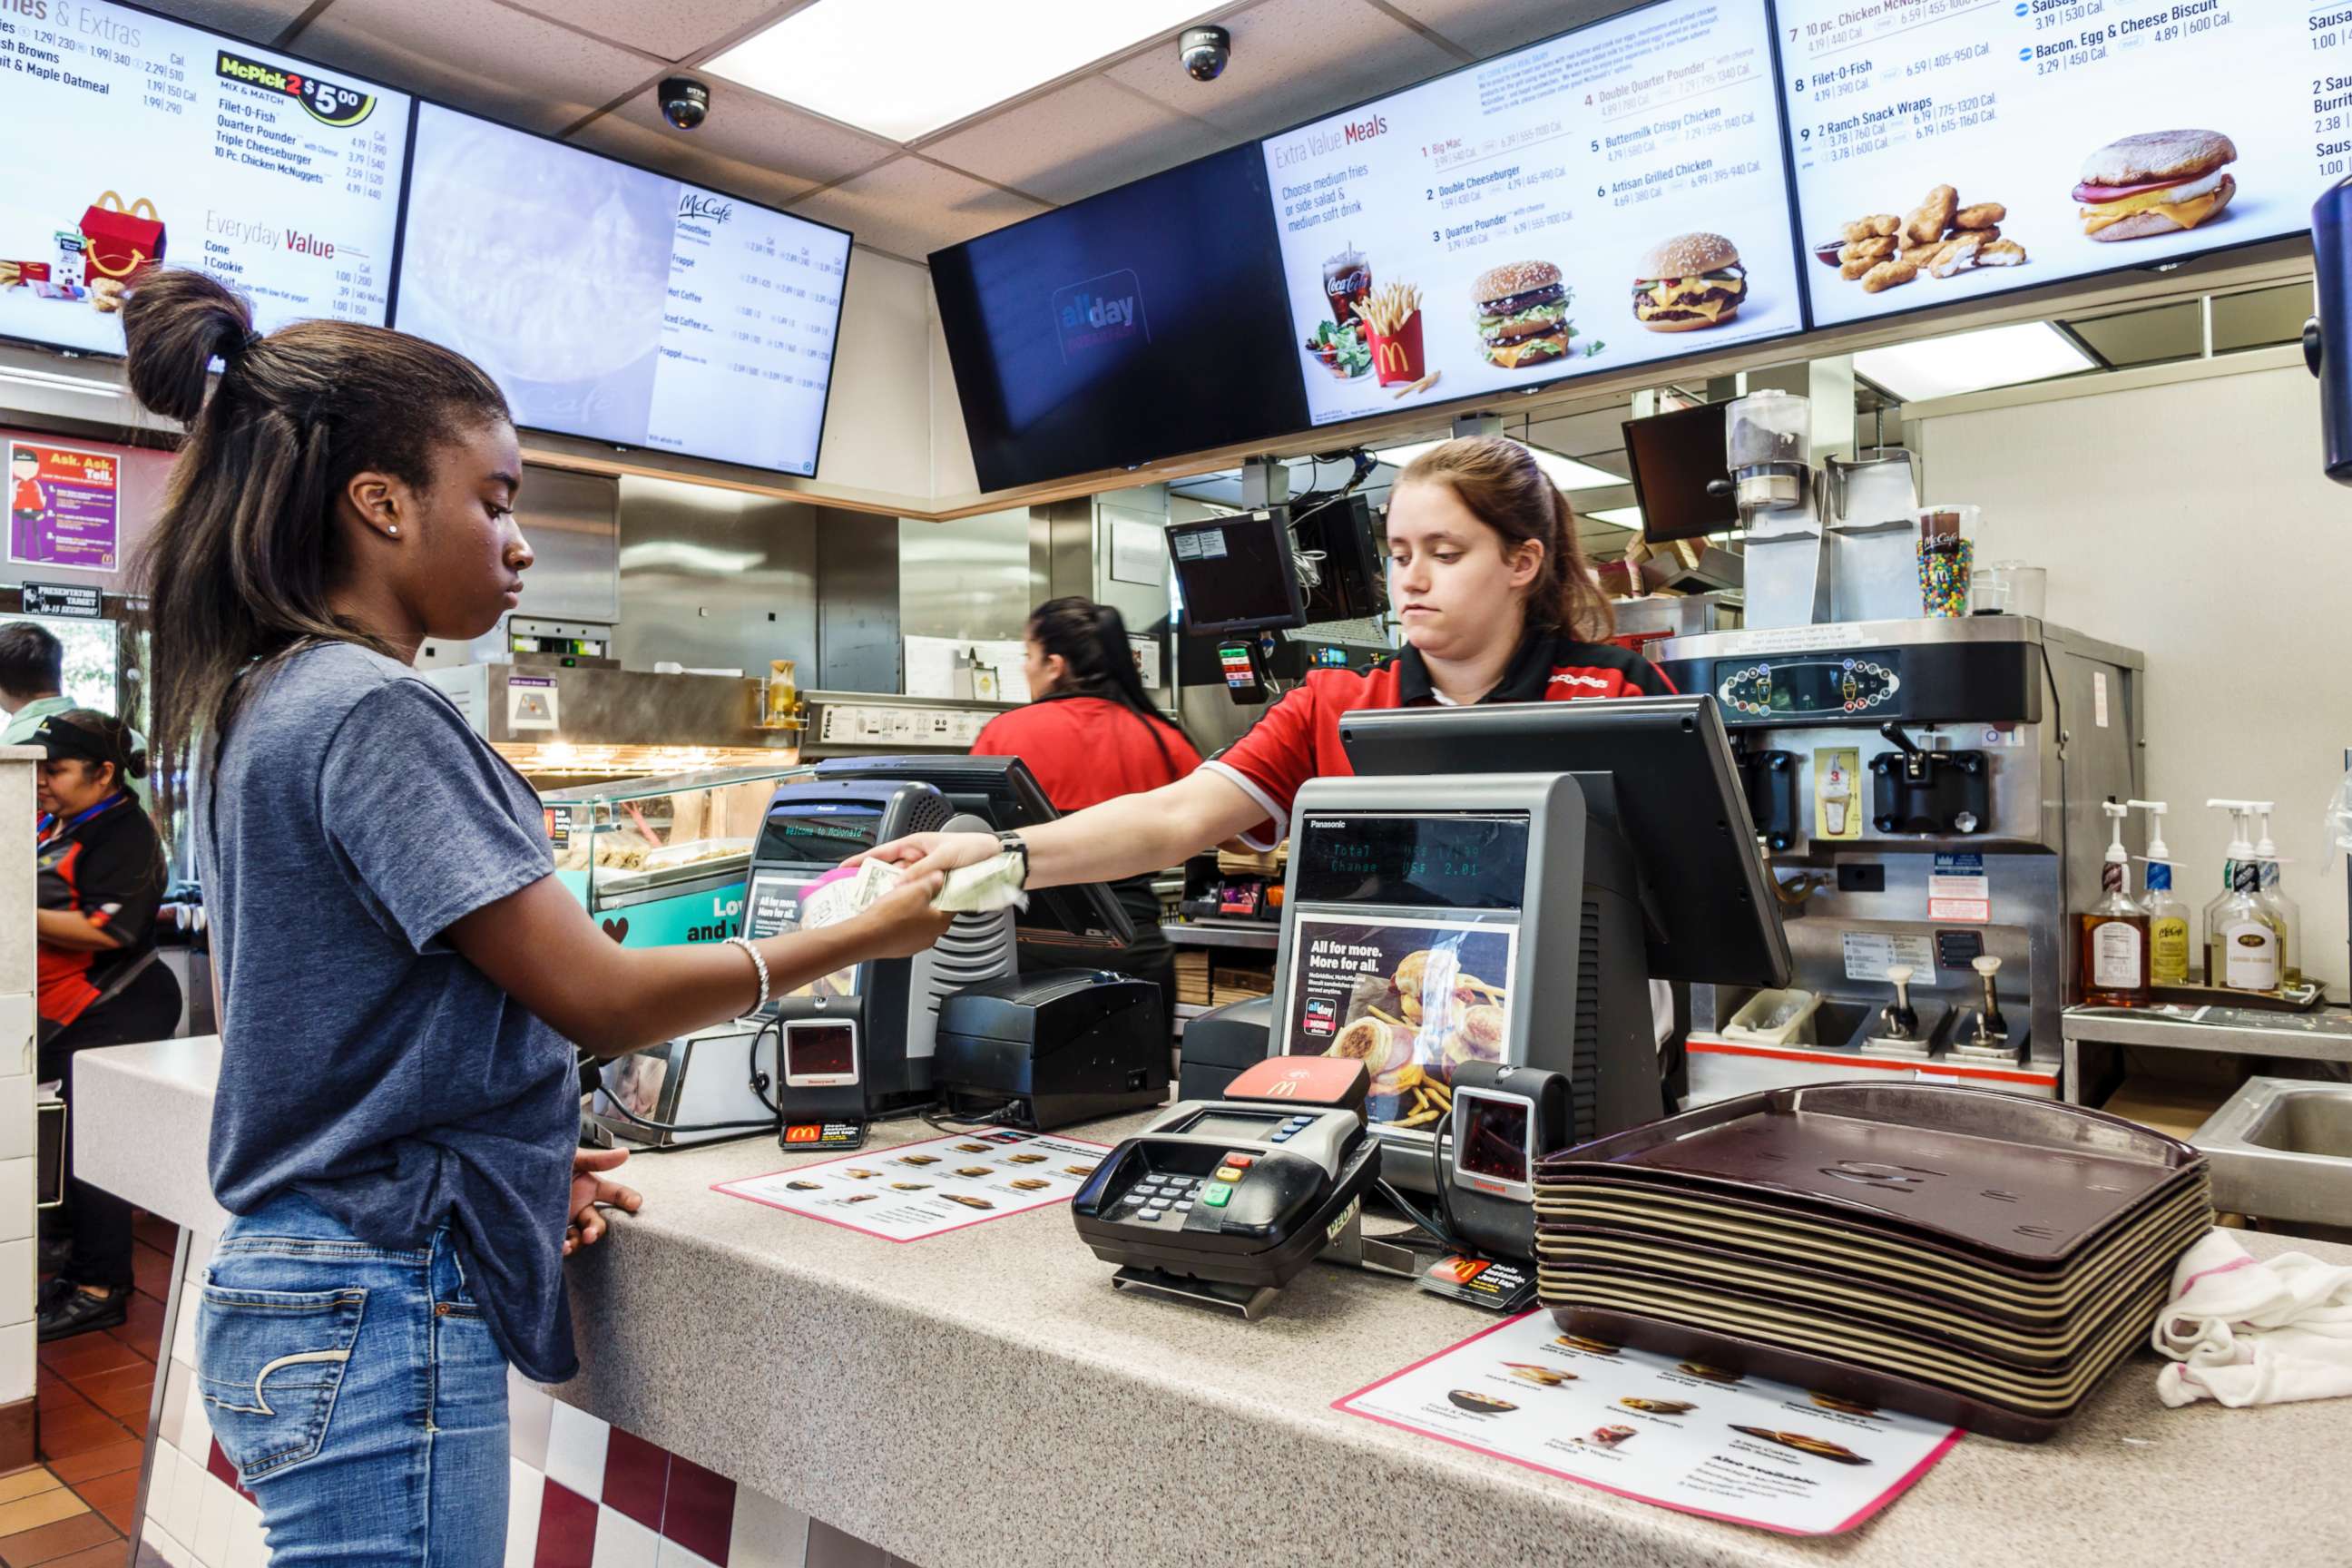 PHOTO: A McDonalds cashier gives change to a young customer in Vero Beach, Fla., Oct. 23, 2016.